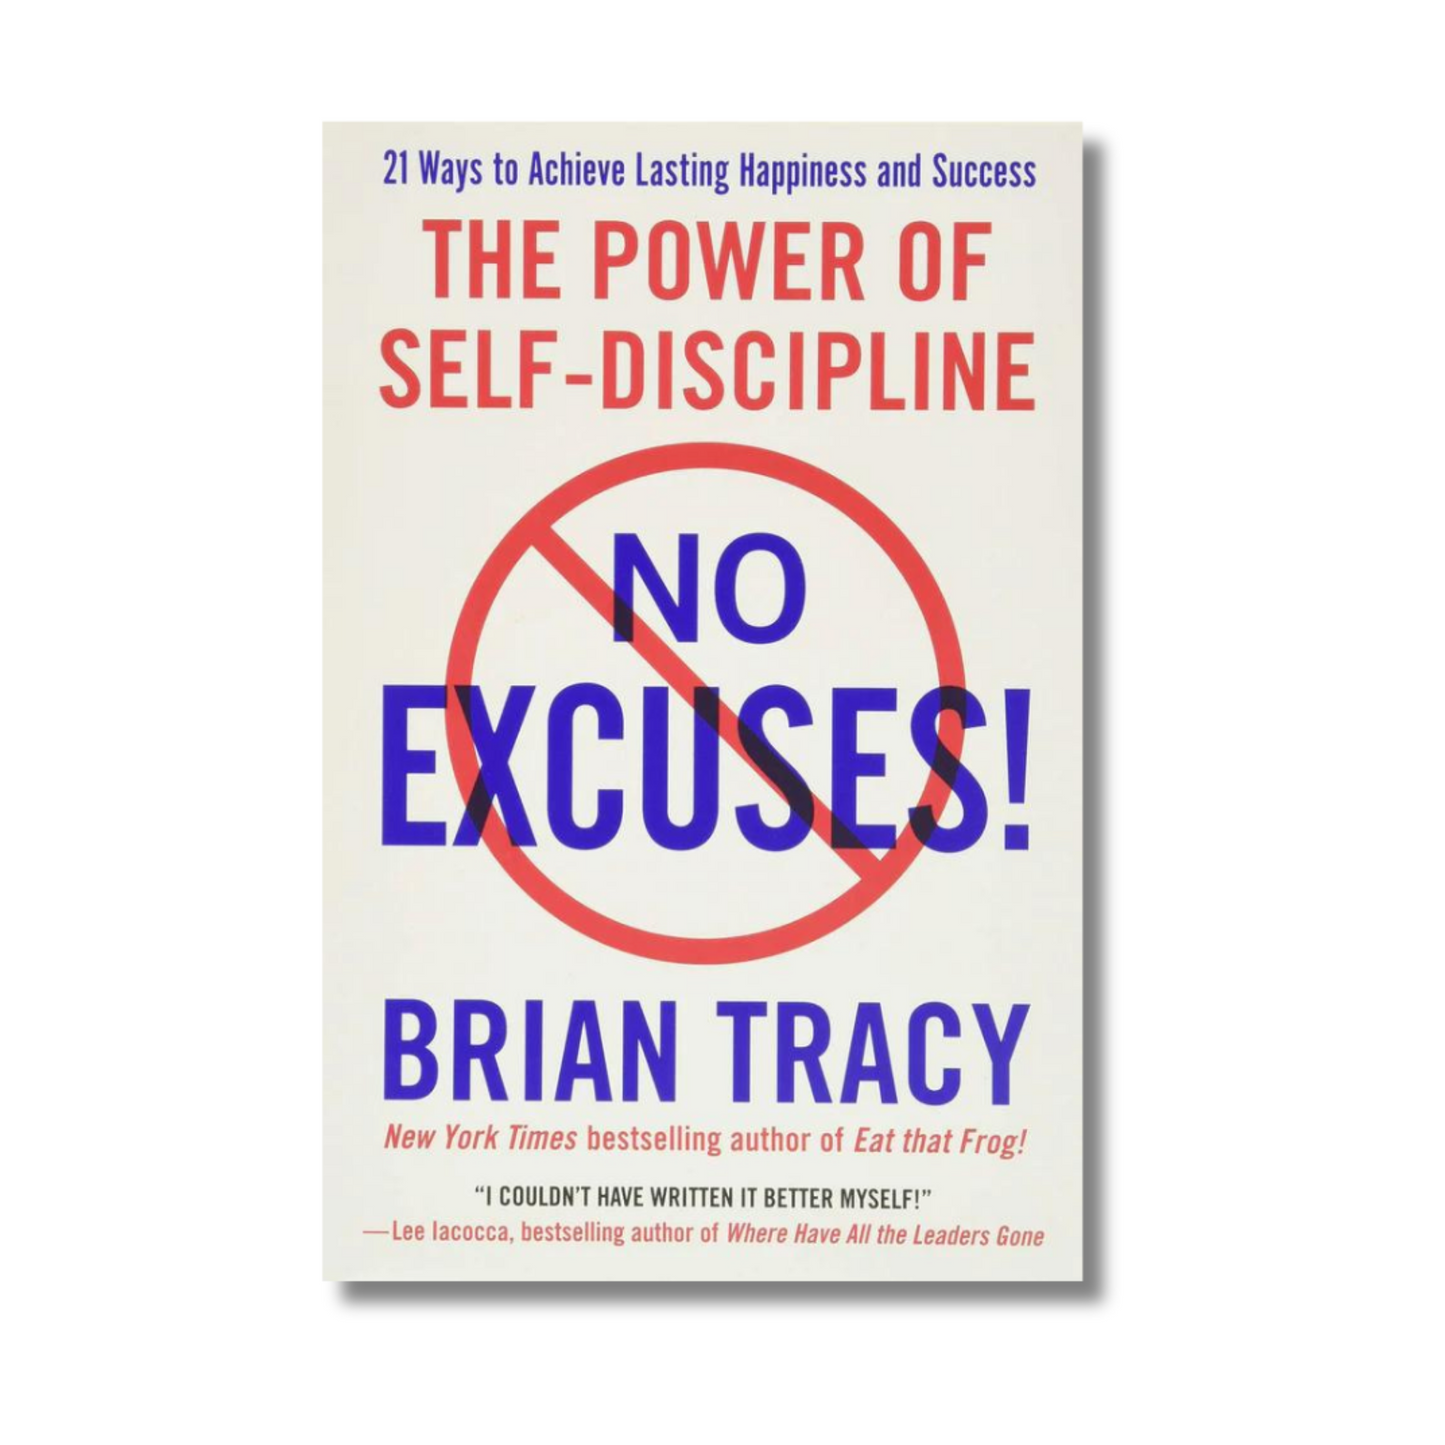 No Excuses!: The Power of Self-Discipline By Brian Tracy (Paperback)